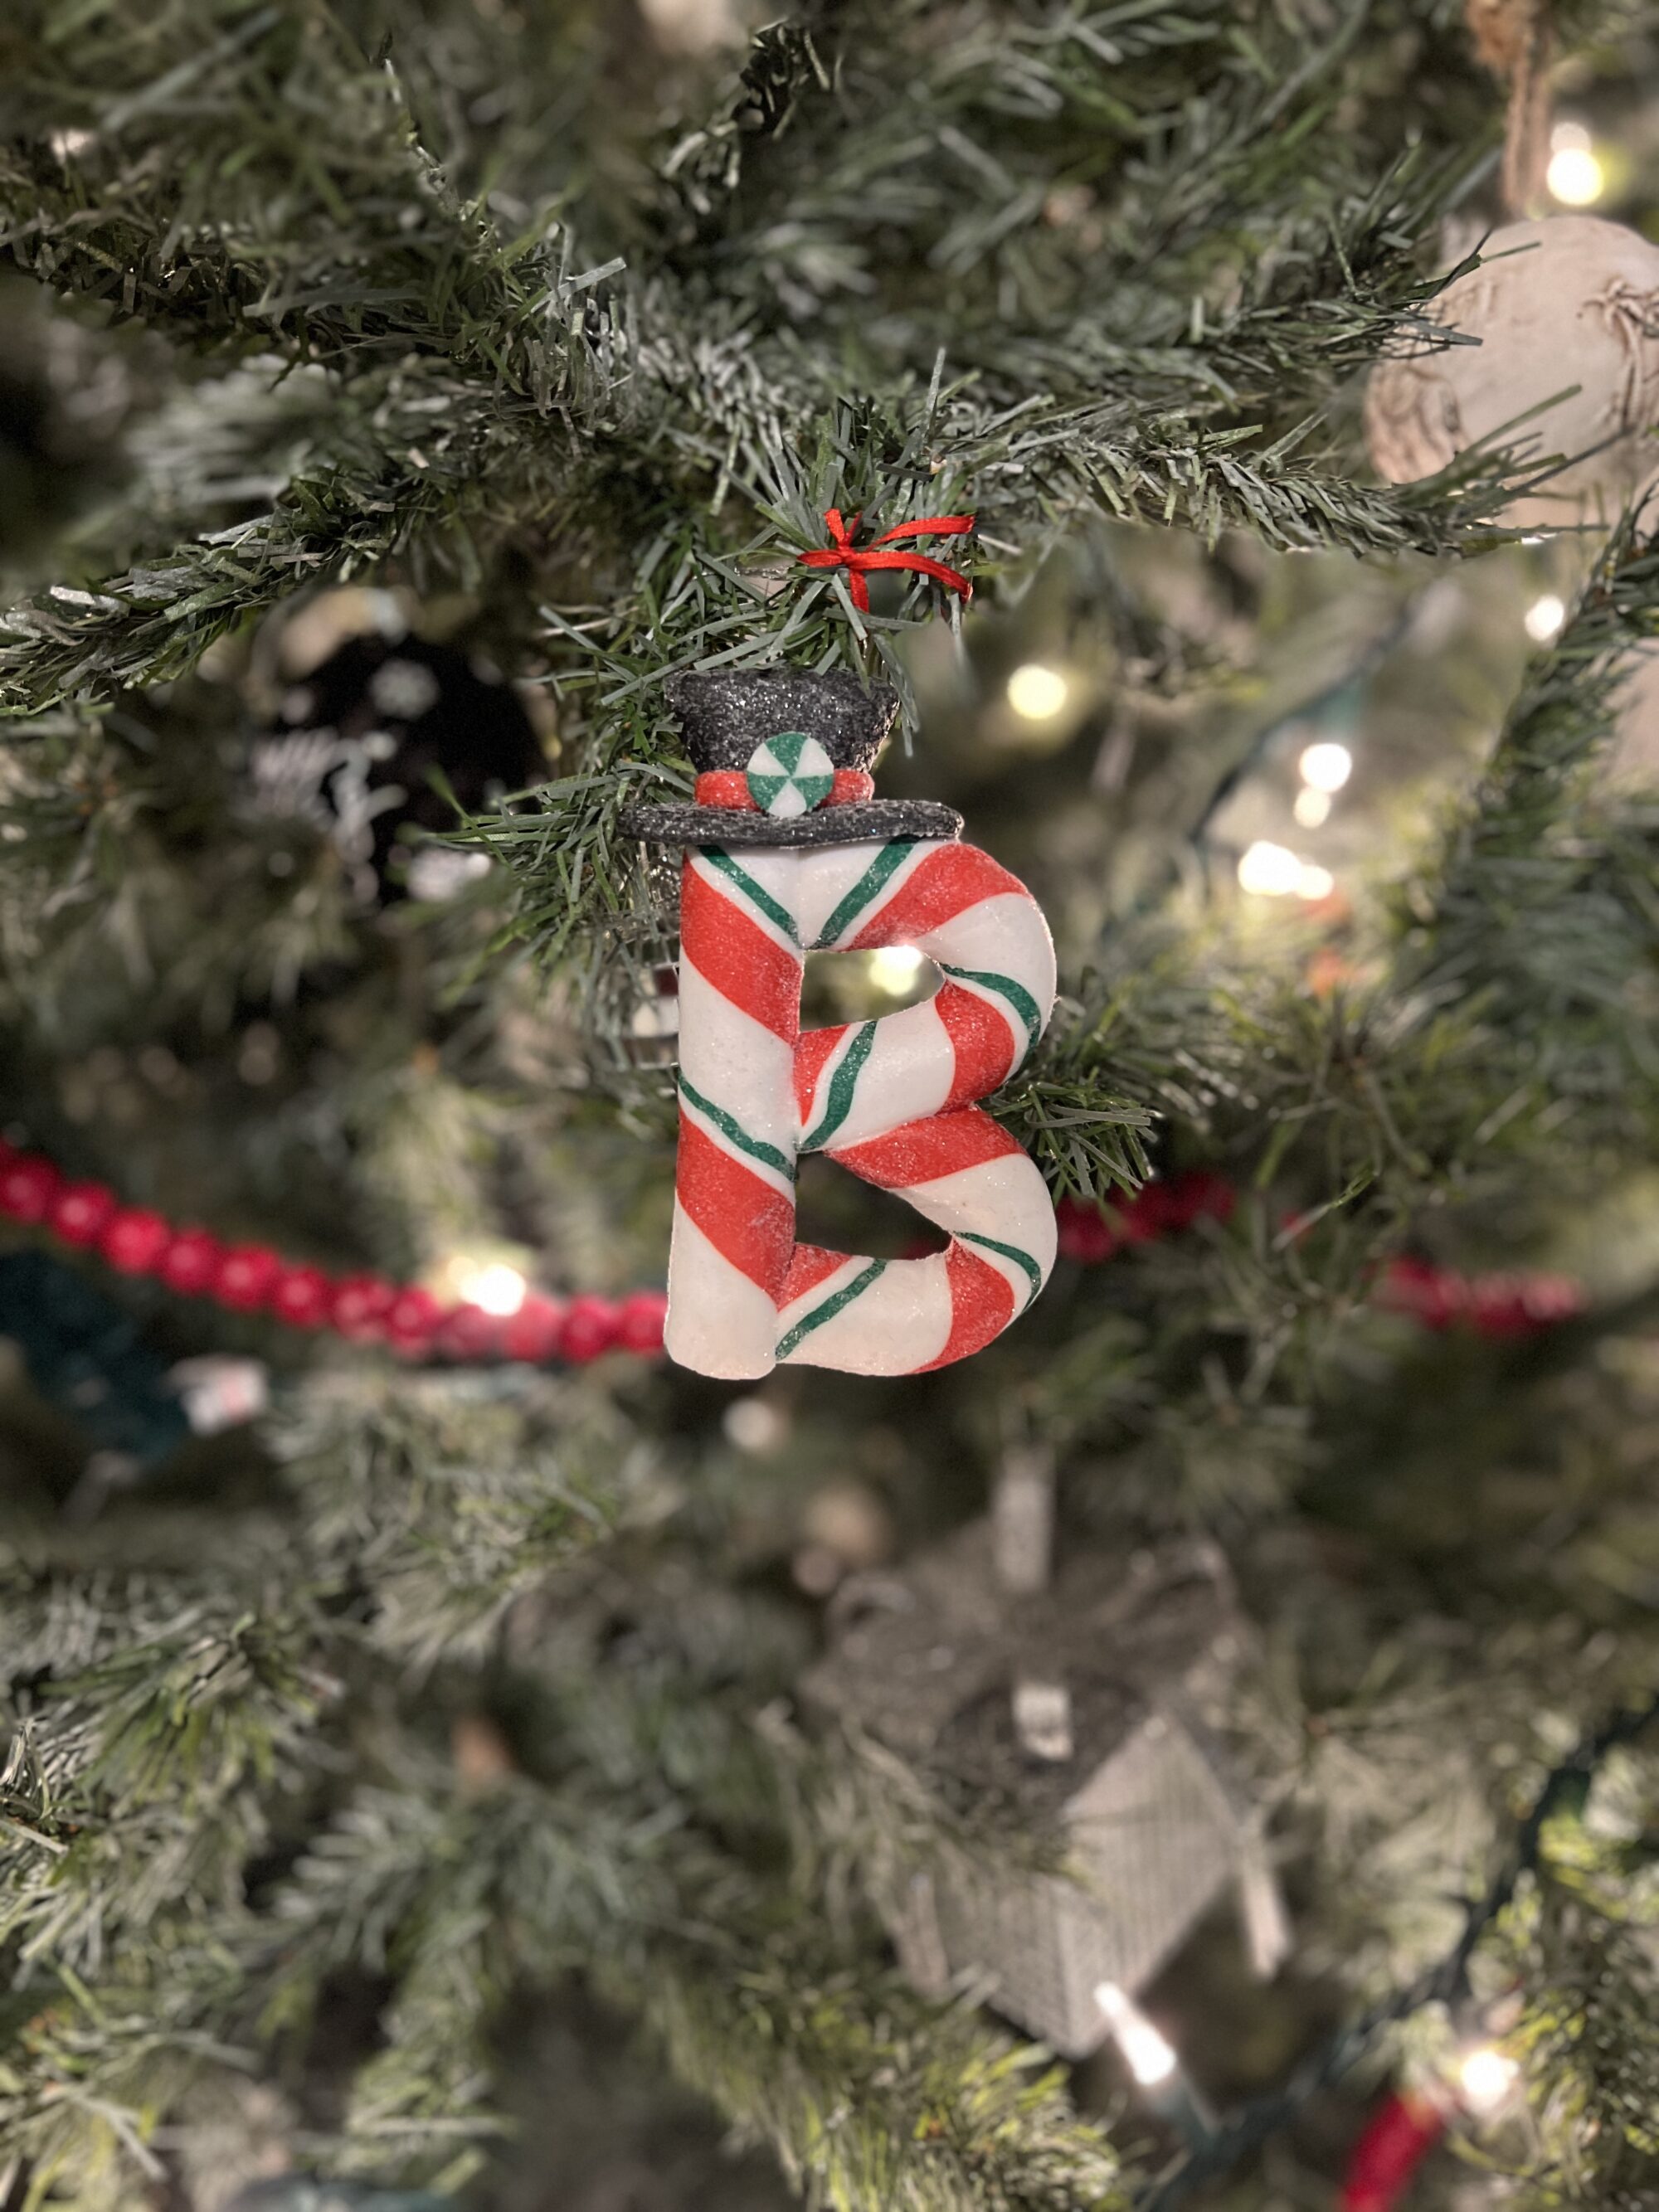 Photo of an ornament shaped like the letter B hanging on a Christmas tree.